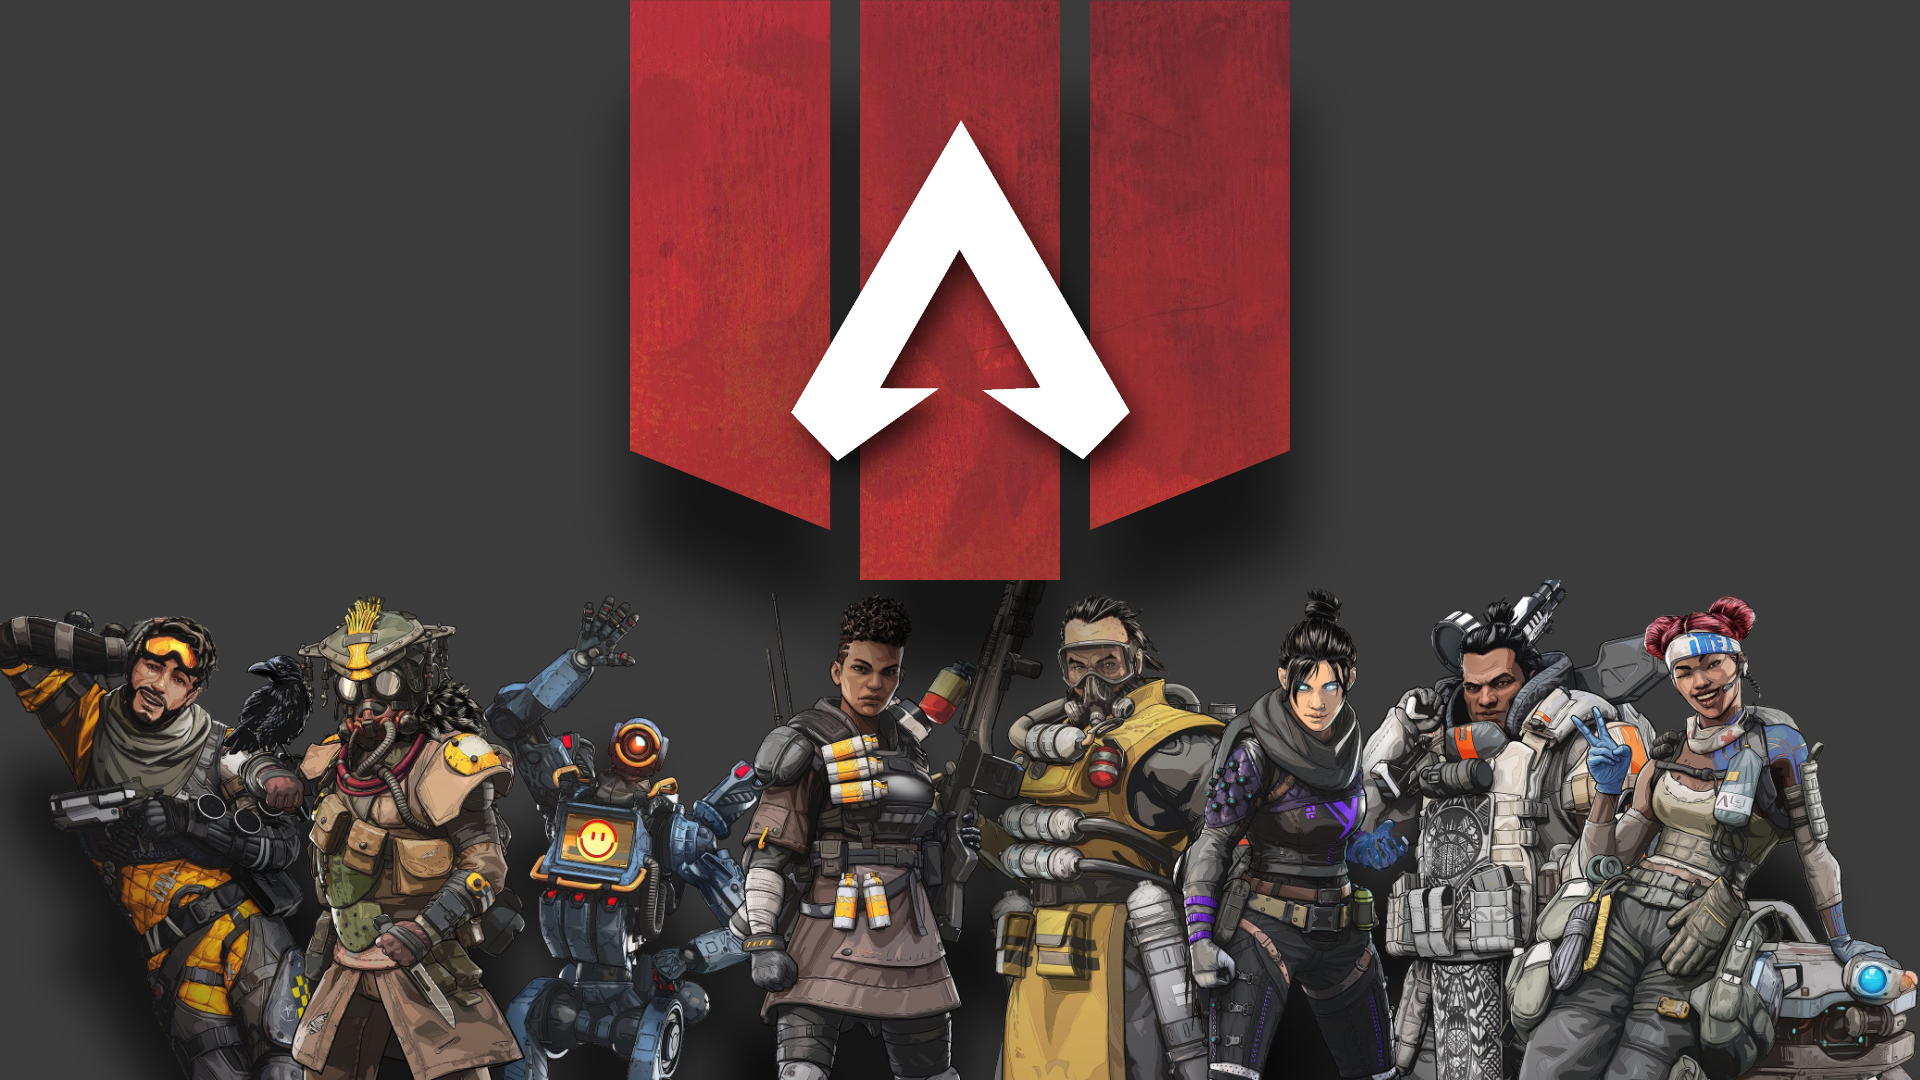 Ea Apex Legends Wallpapers Free Wallpaper Collection Peapix Free Wallpapers